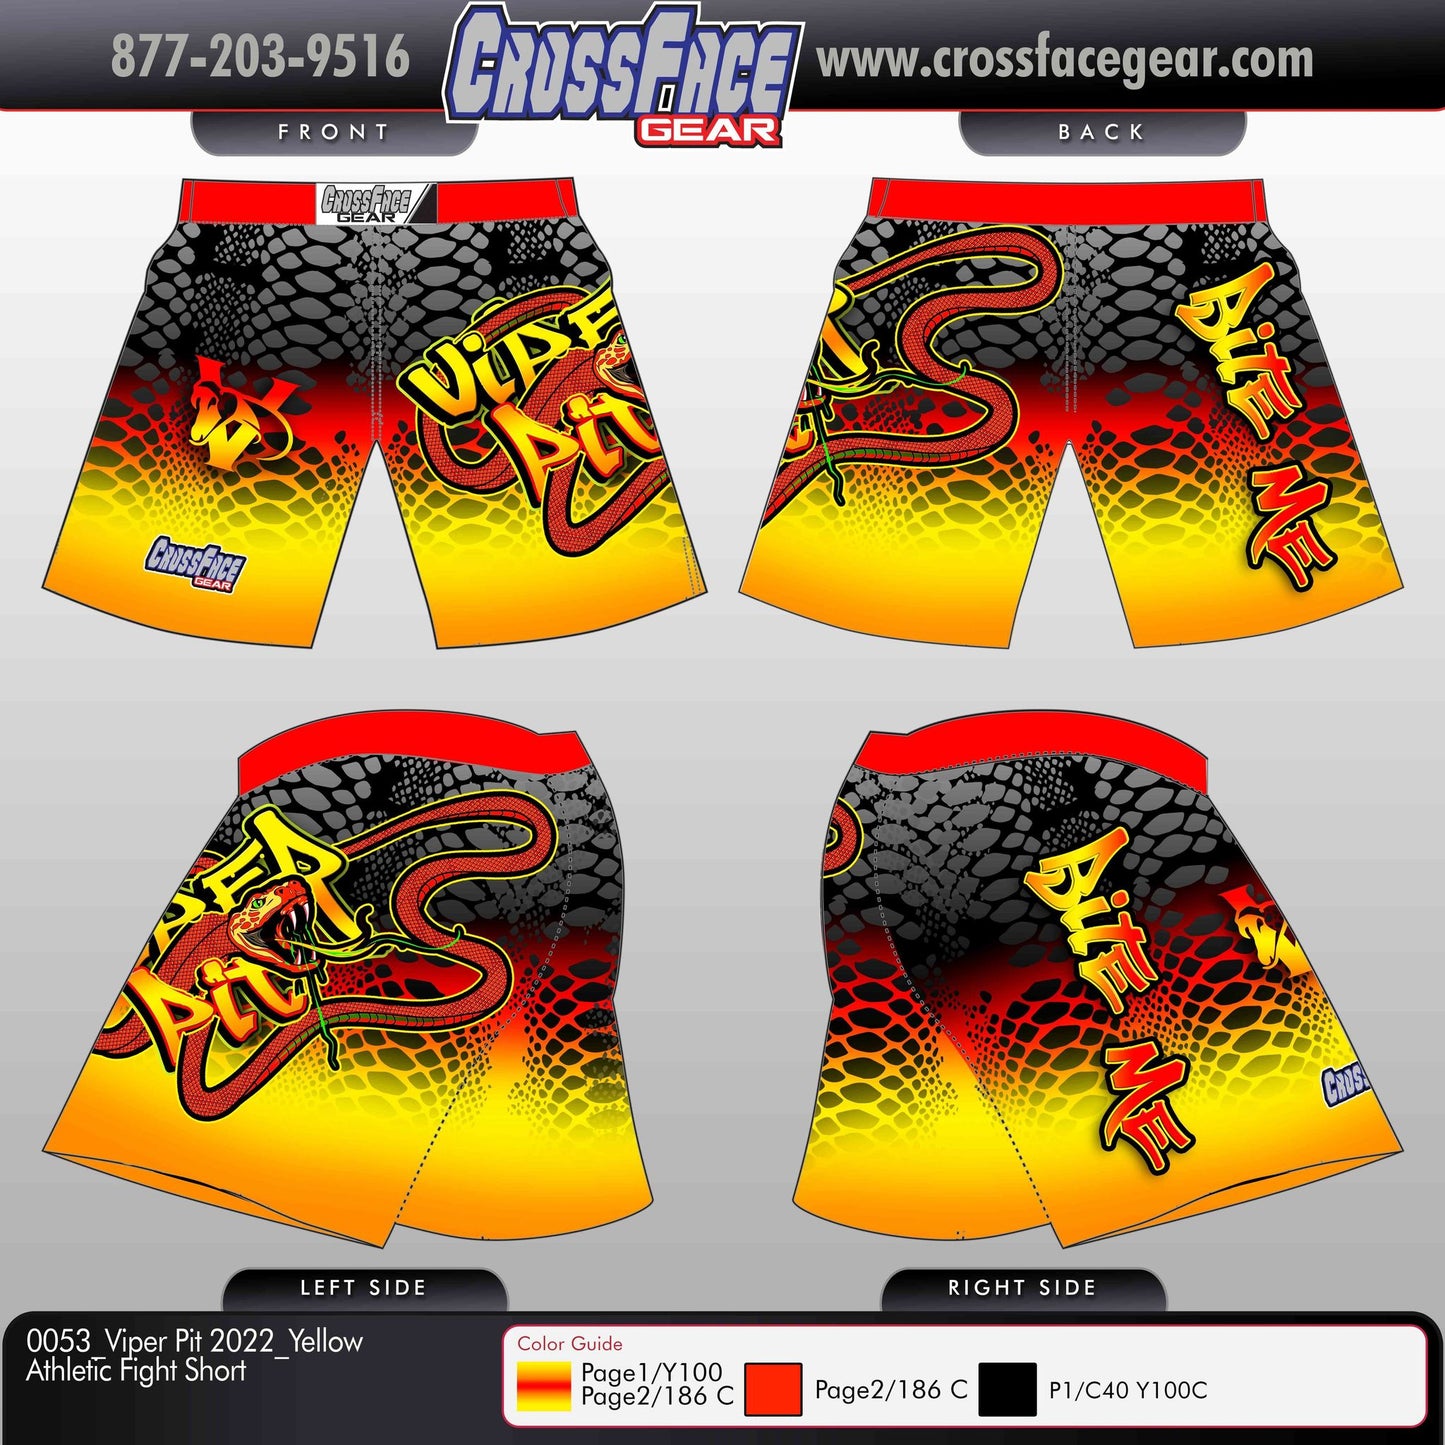 Viper Pit 2022 Full Sublimated Athletic Fight Shorts (YELLOW)